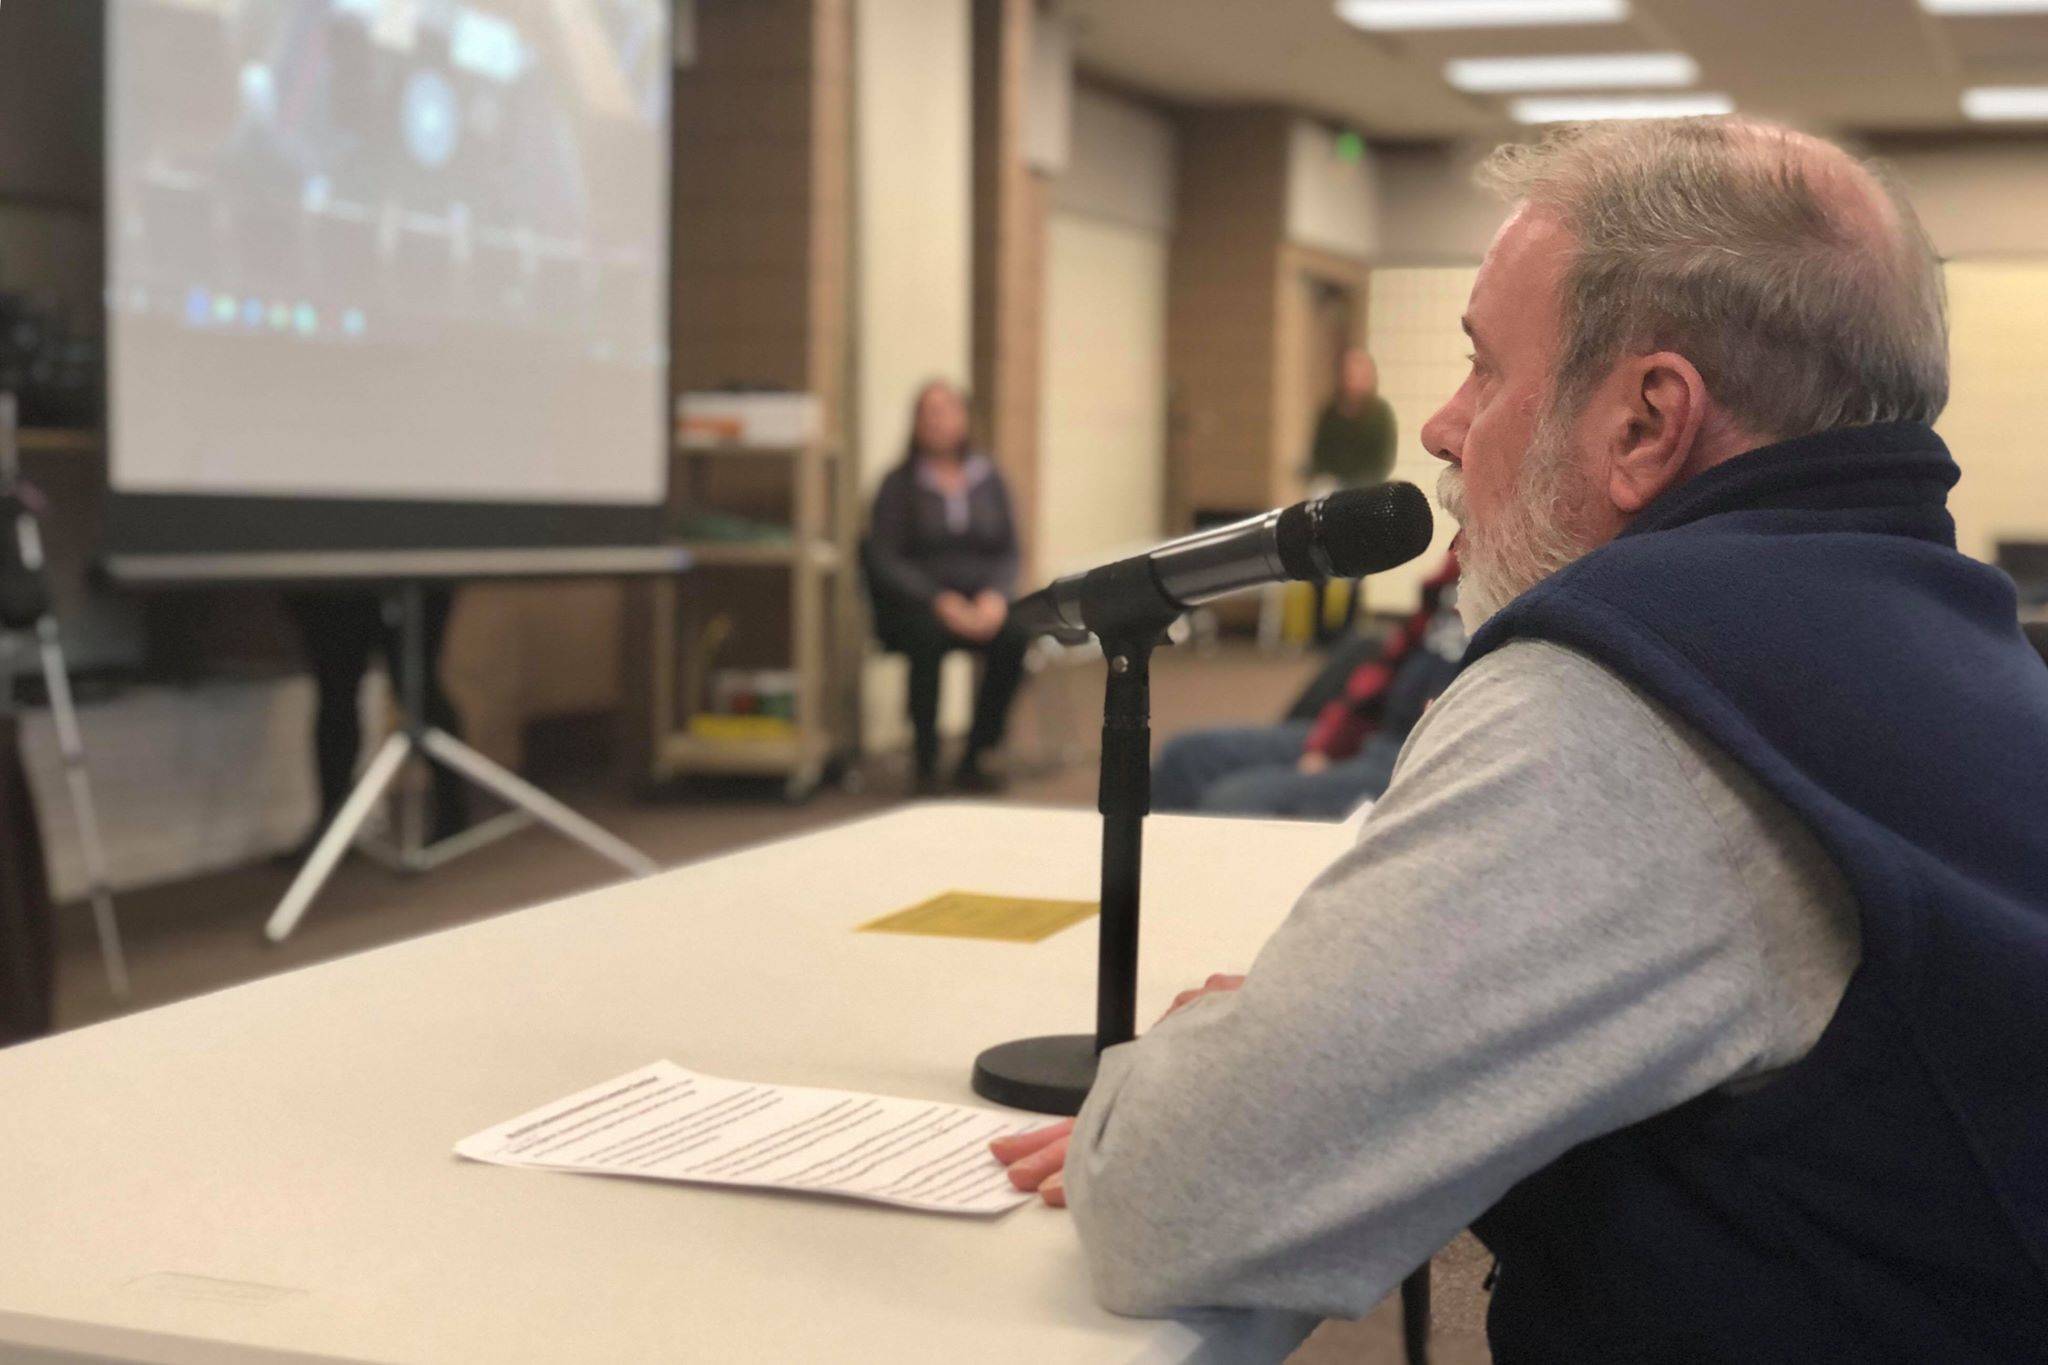 Kenai Peninsula College Director Gary Turner speaks to the House Finance Committee members in against cuts to the University of Alaska on Saturday, March 23, 2019, at the Soldotna Sports Complex in Soldotna, Alaska. (Photo by Victoria Petersen/Peninsula Clarion)